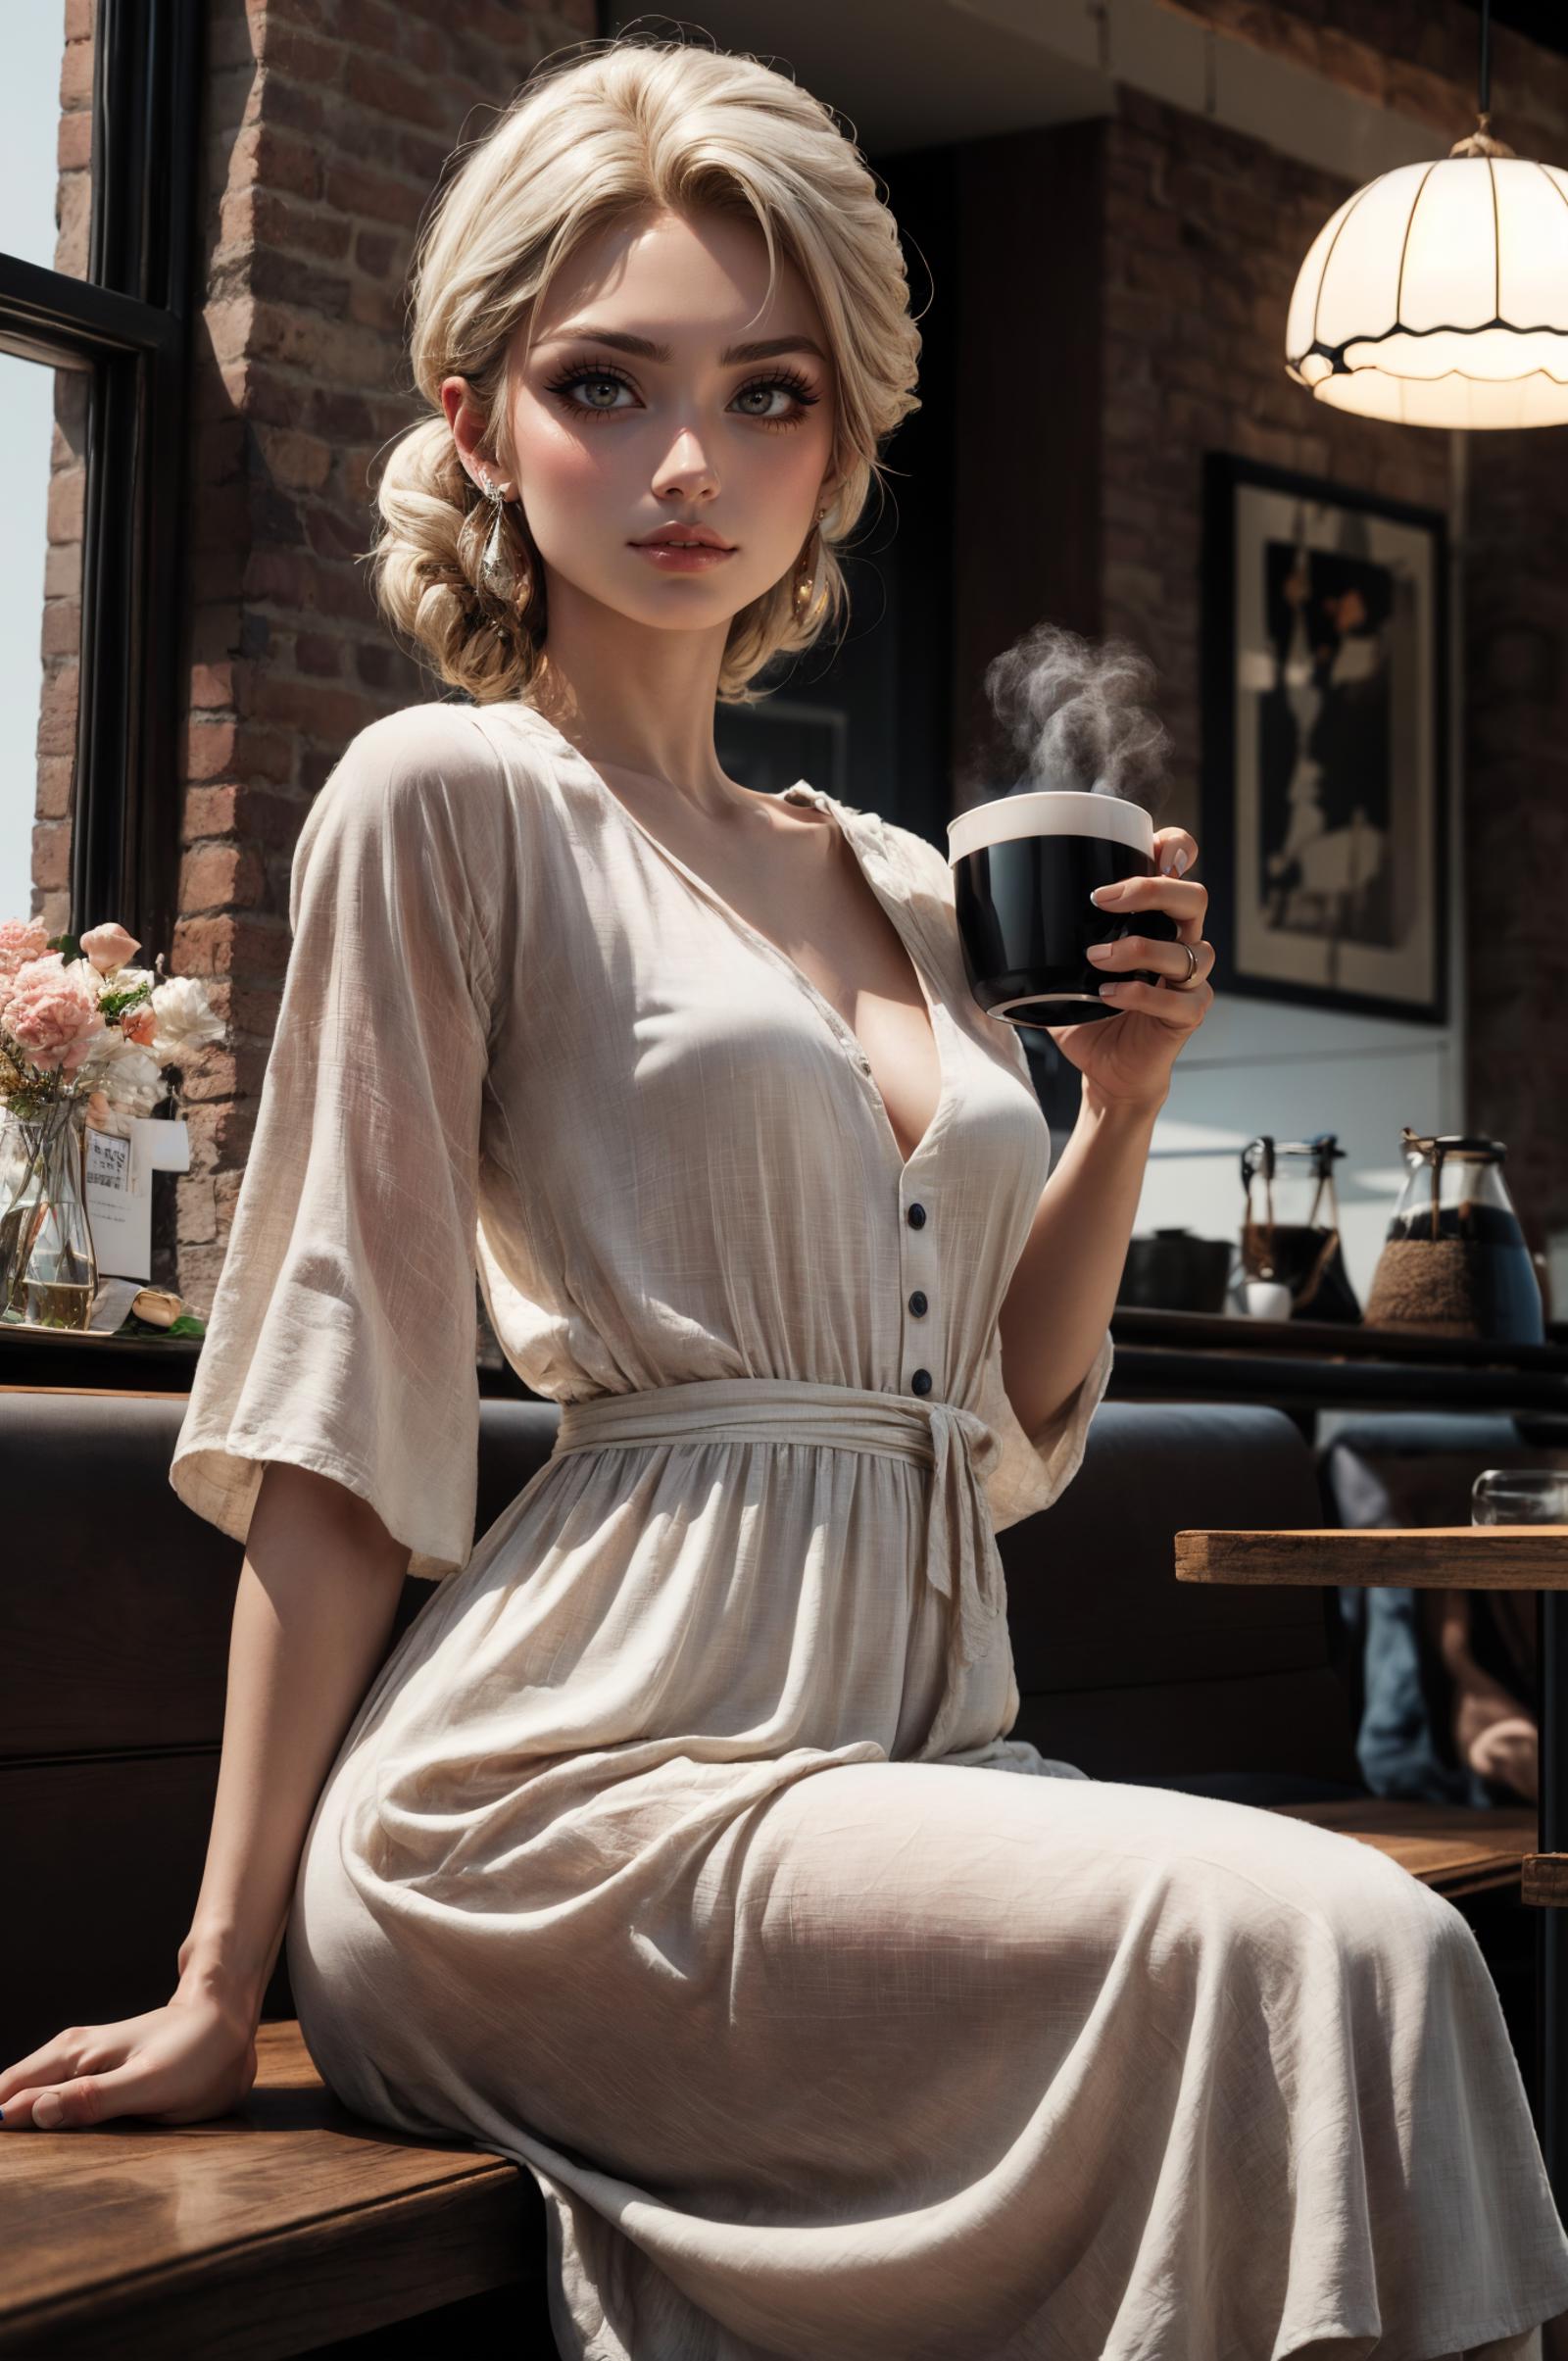 Linen dress - clothing image by Artificial_Lion